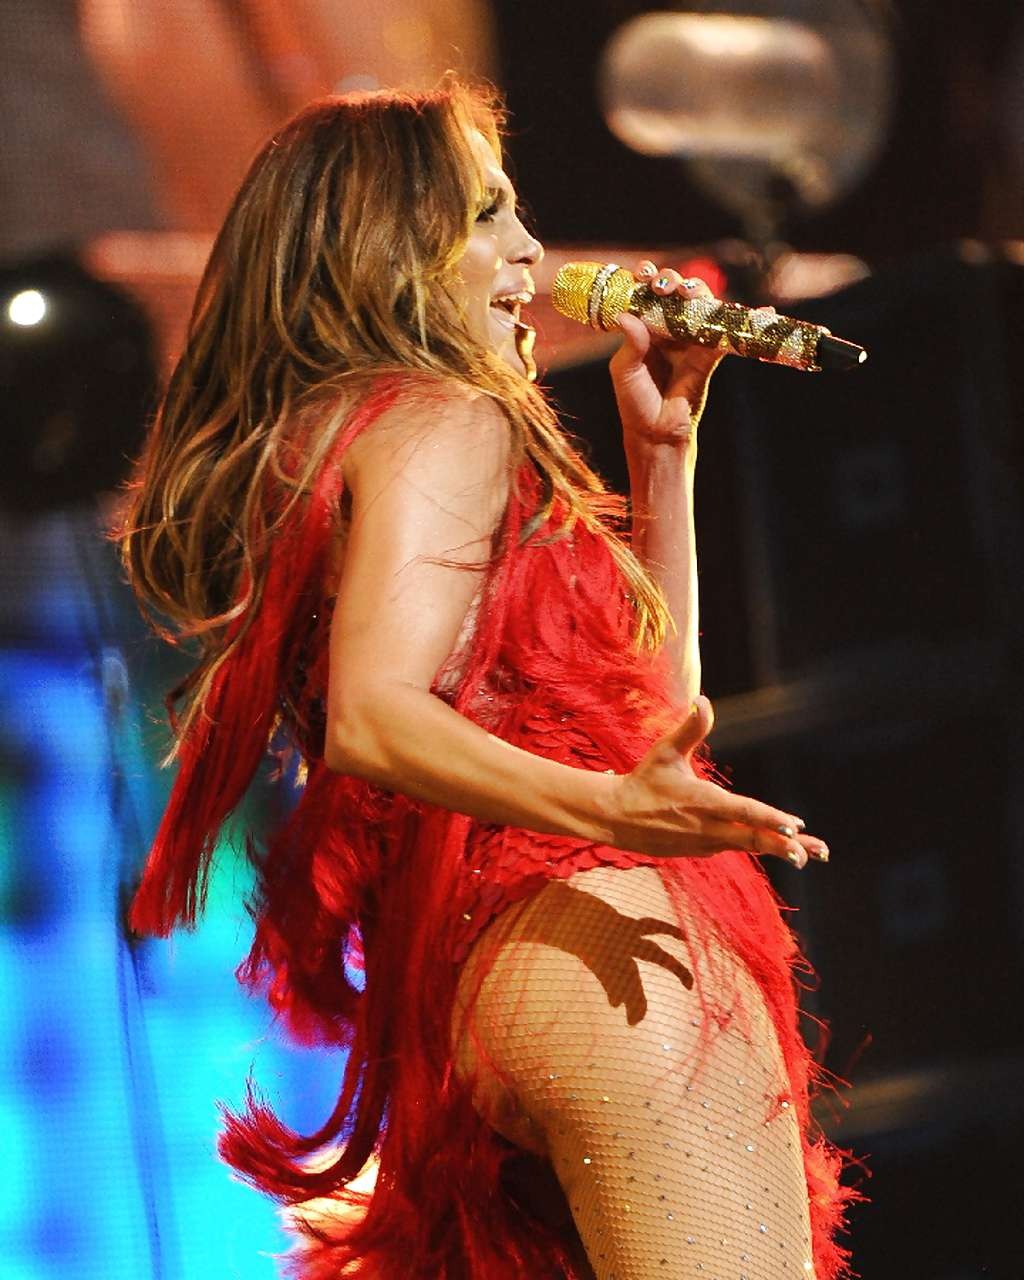 Jennifer Lopez leggy and show panties on stage in red dress #75286723